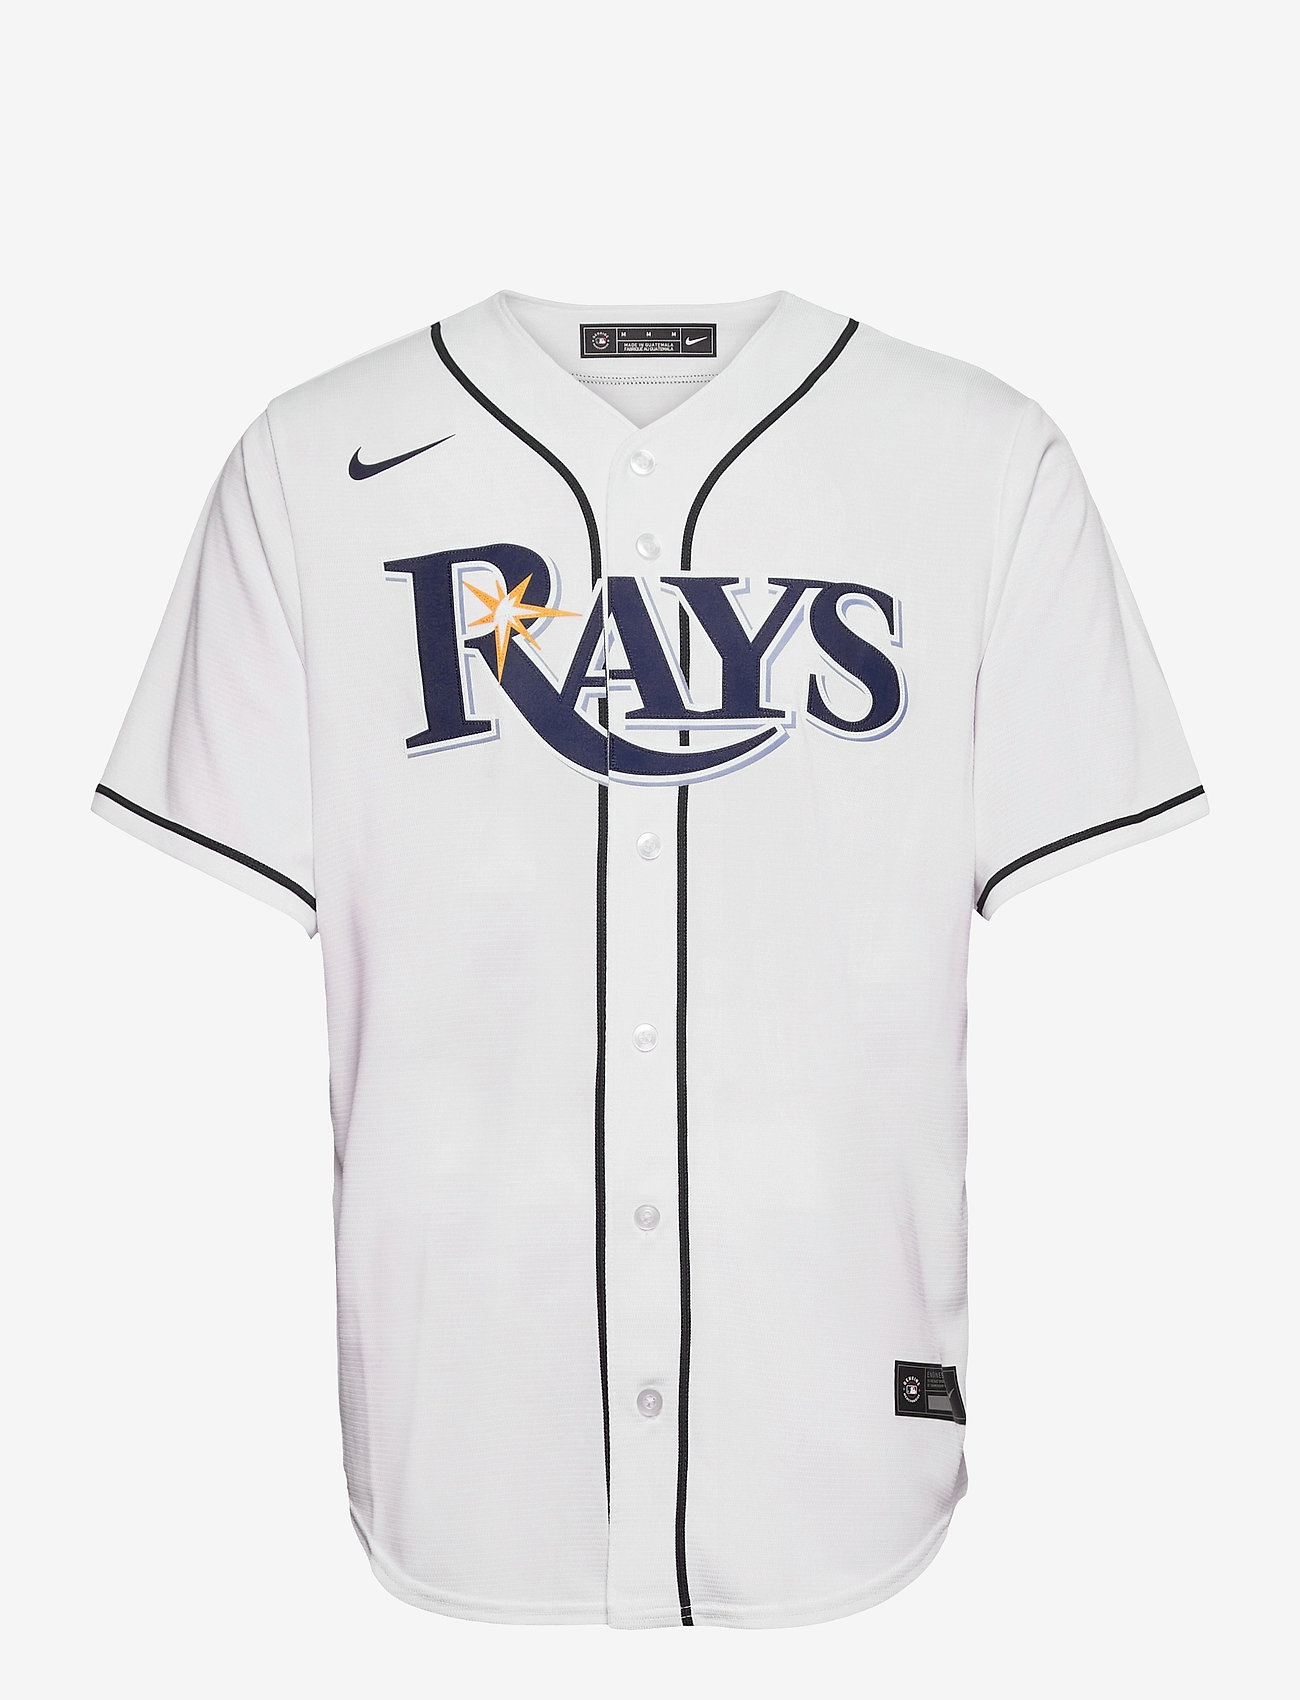 Tampa Bay Rays Nike Official Replica Home Jersey (White) (83.93 ...